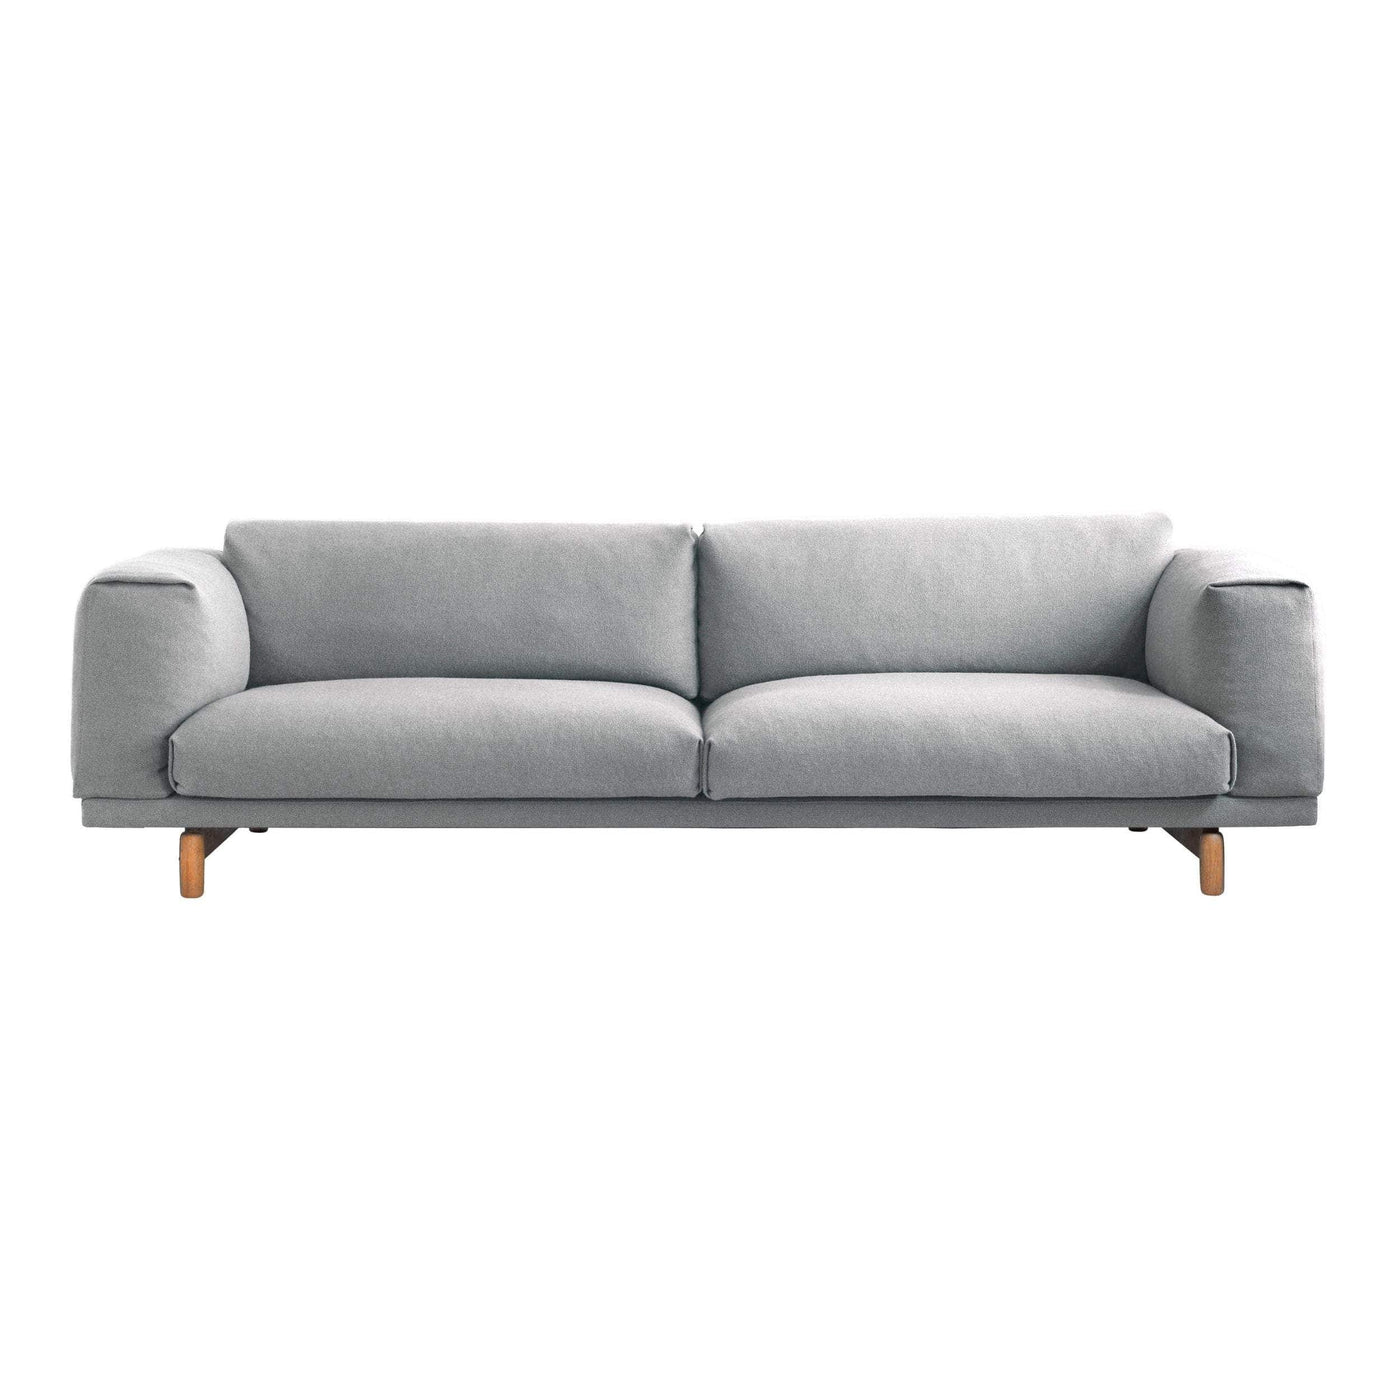 Muuto Rest 3 Seater Sofa hallingdal 123 grey  fabric. Made to order from someday designs. #colour_hallingdal-123-grey